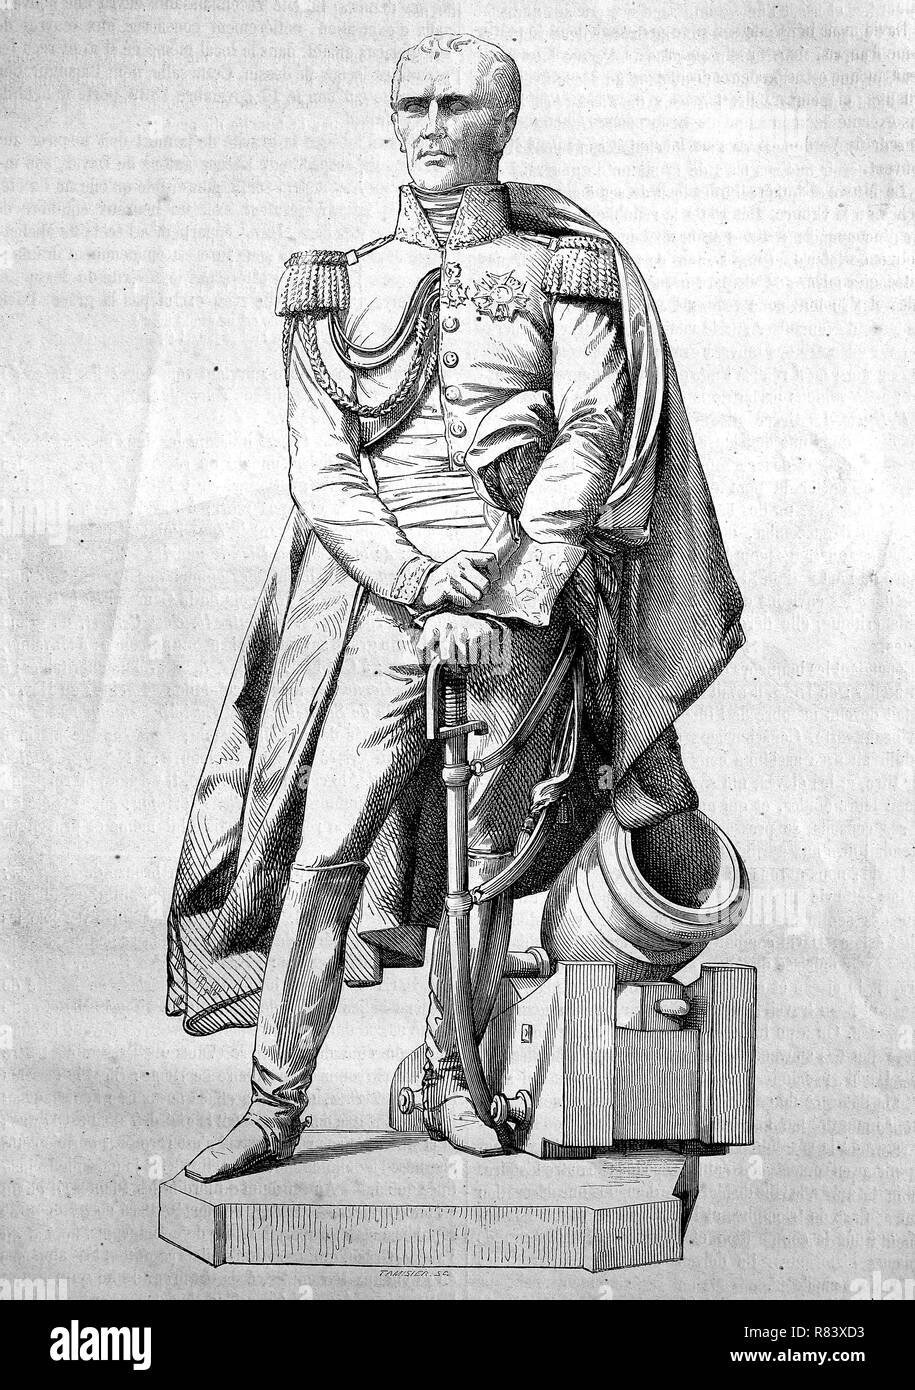 Digital improved reproduction, General Antoine Drouot, Comte Drout, 1774-1847, a French officer who fought in the French Revolutionary and Napoleonic Wars, Antoine Drouo, ein napoleonischer MilitÃ¤r, Graf, Pair von Frankreich und zuletzt GÃ©nÃ©ral de division der FuÃŸartillerie der Garde Napoleons, from an original print from the year 1855 Stock Photo